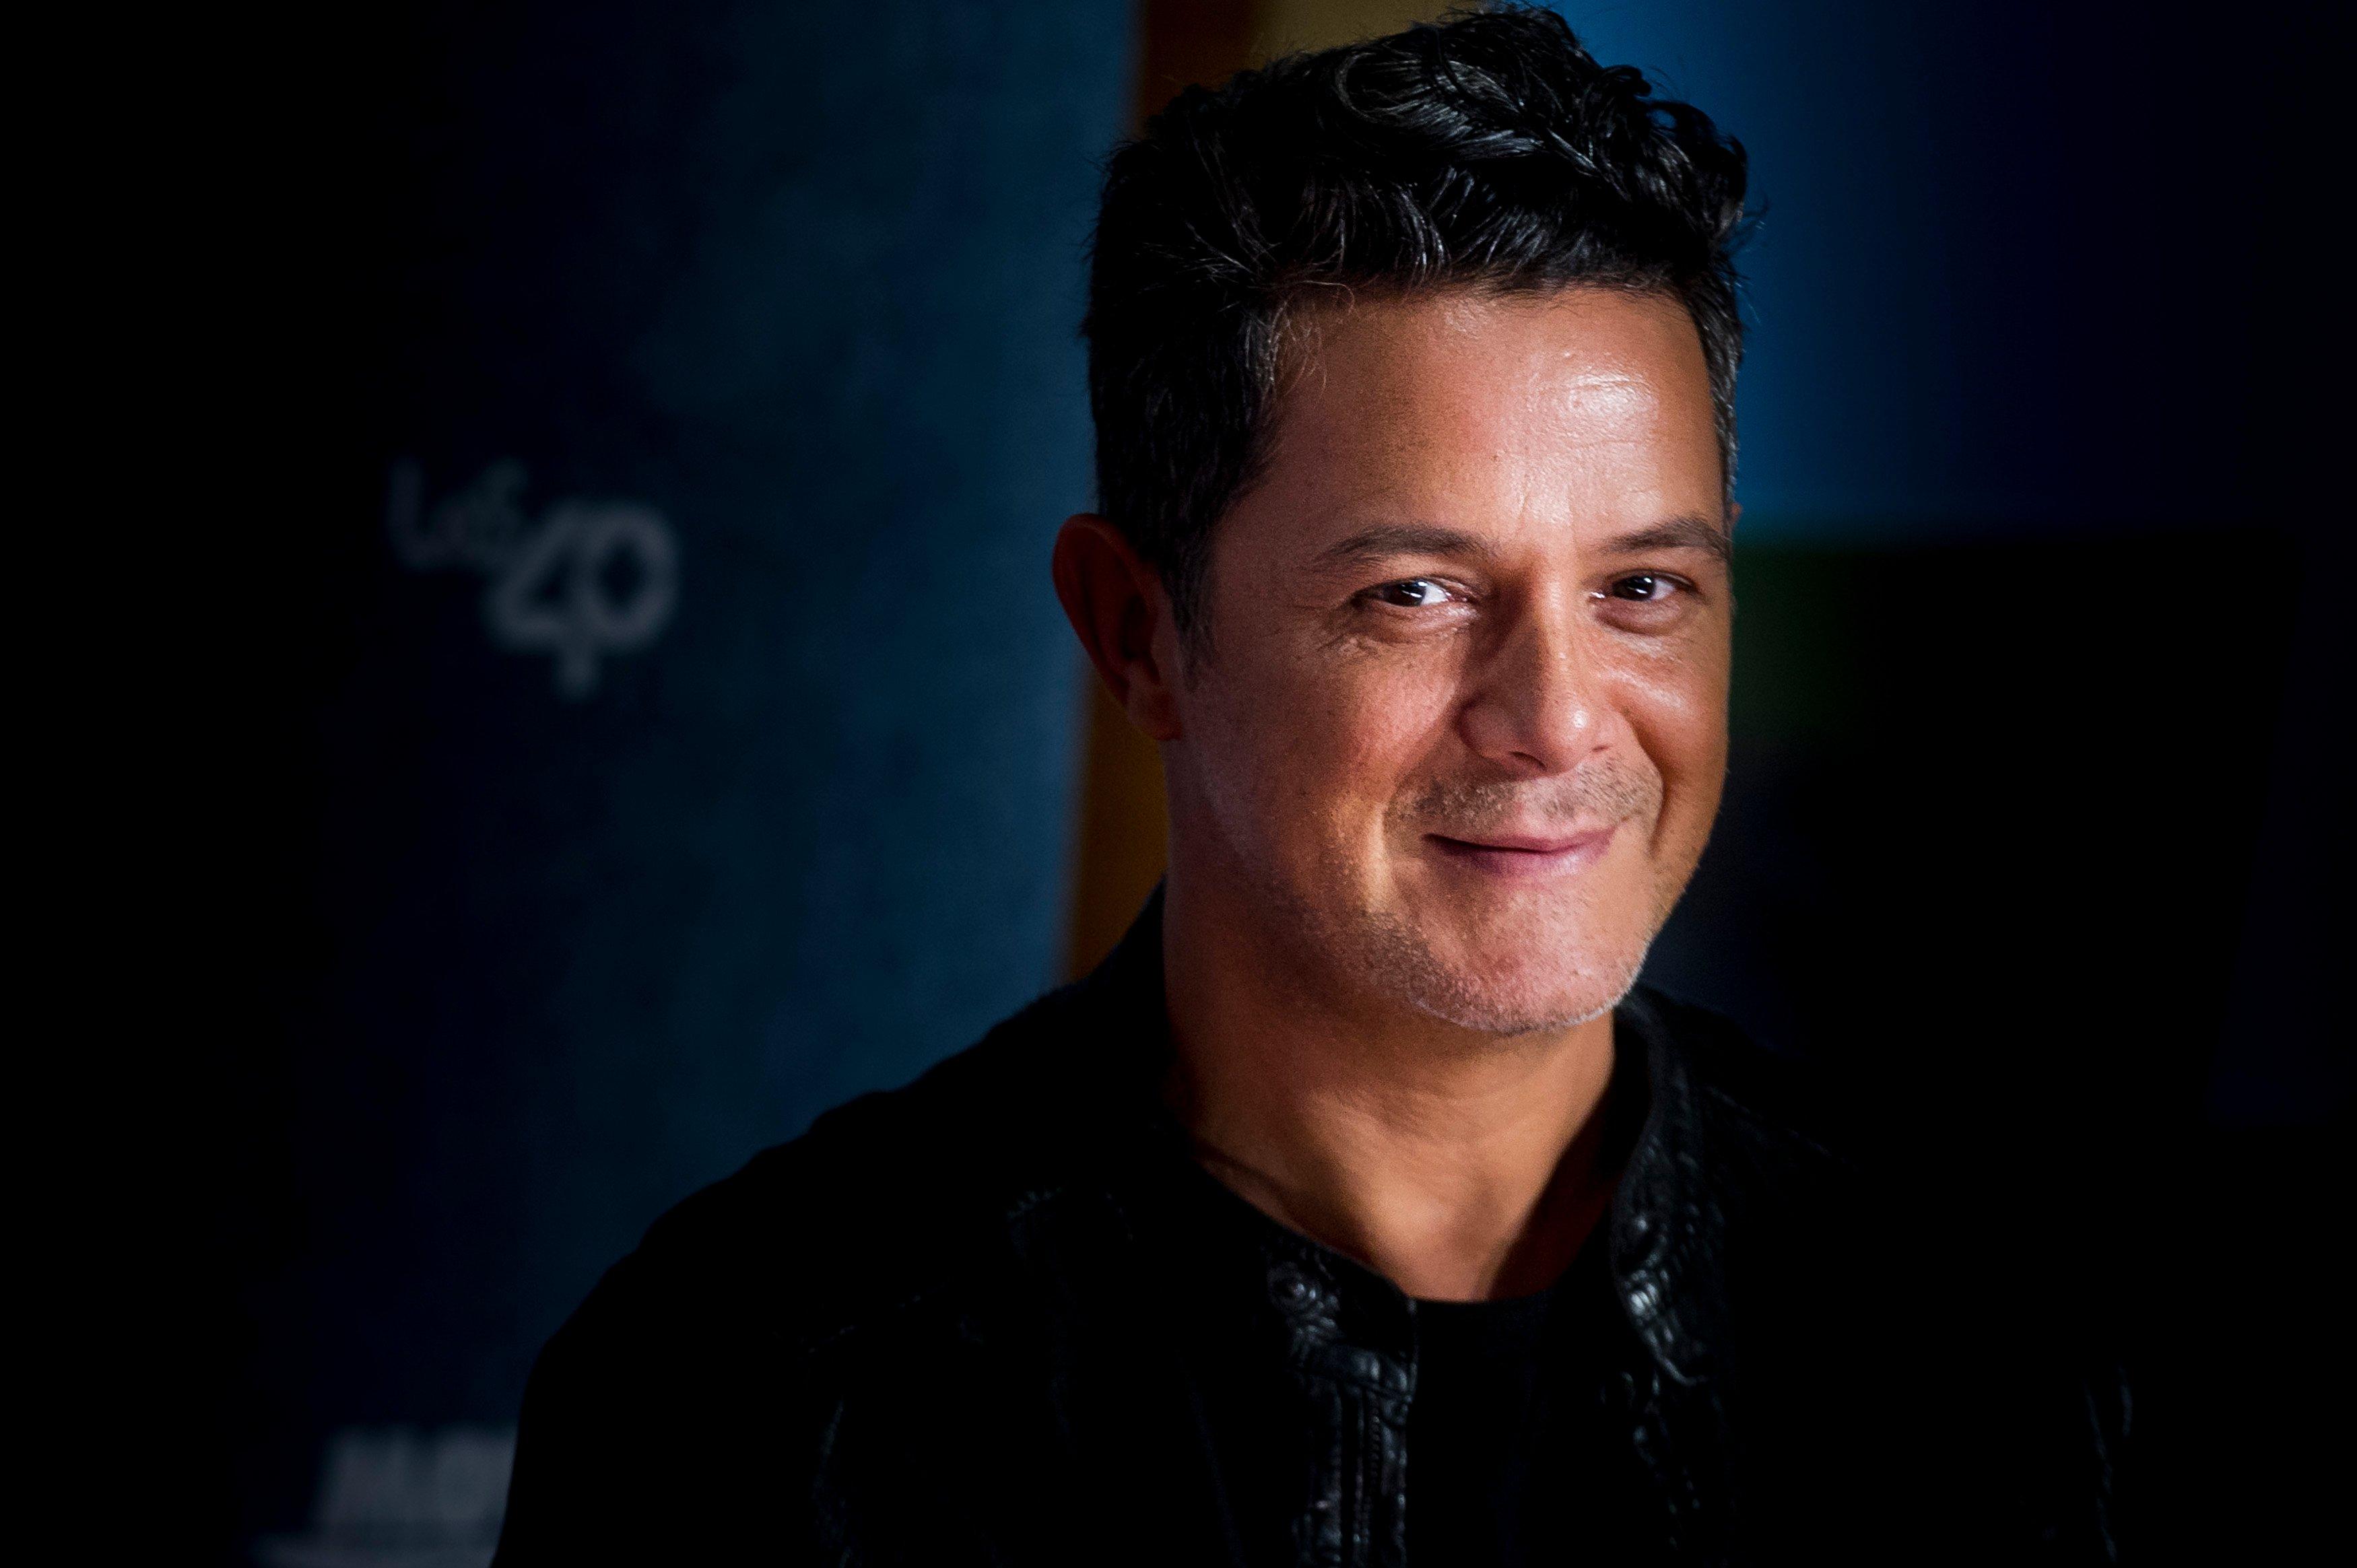 Alejandro Sanz photographed in 2017